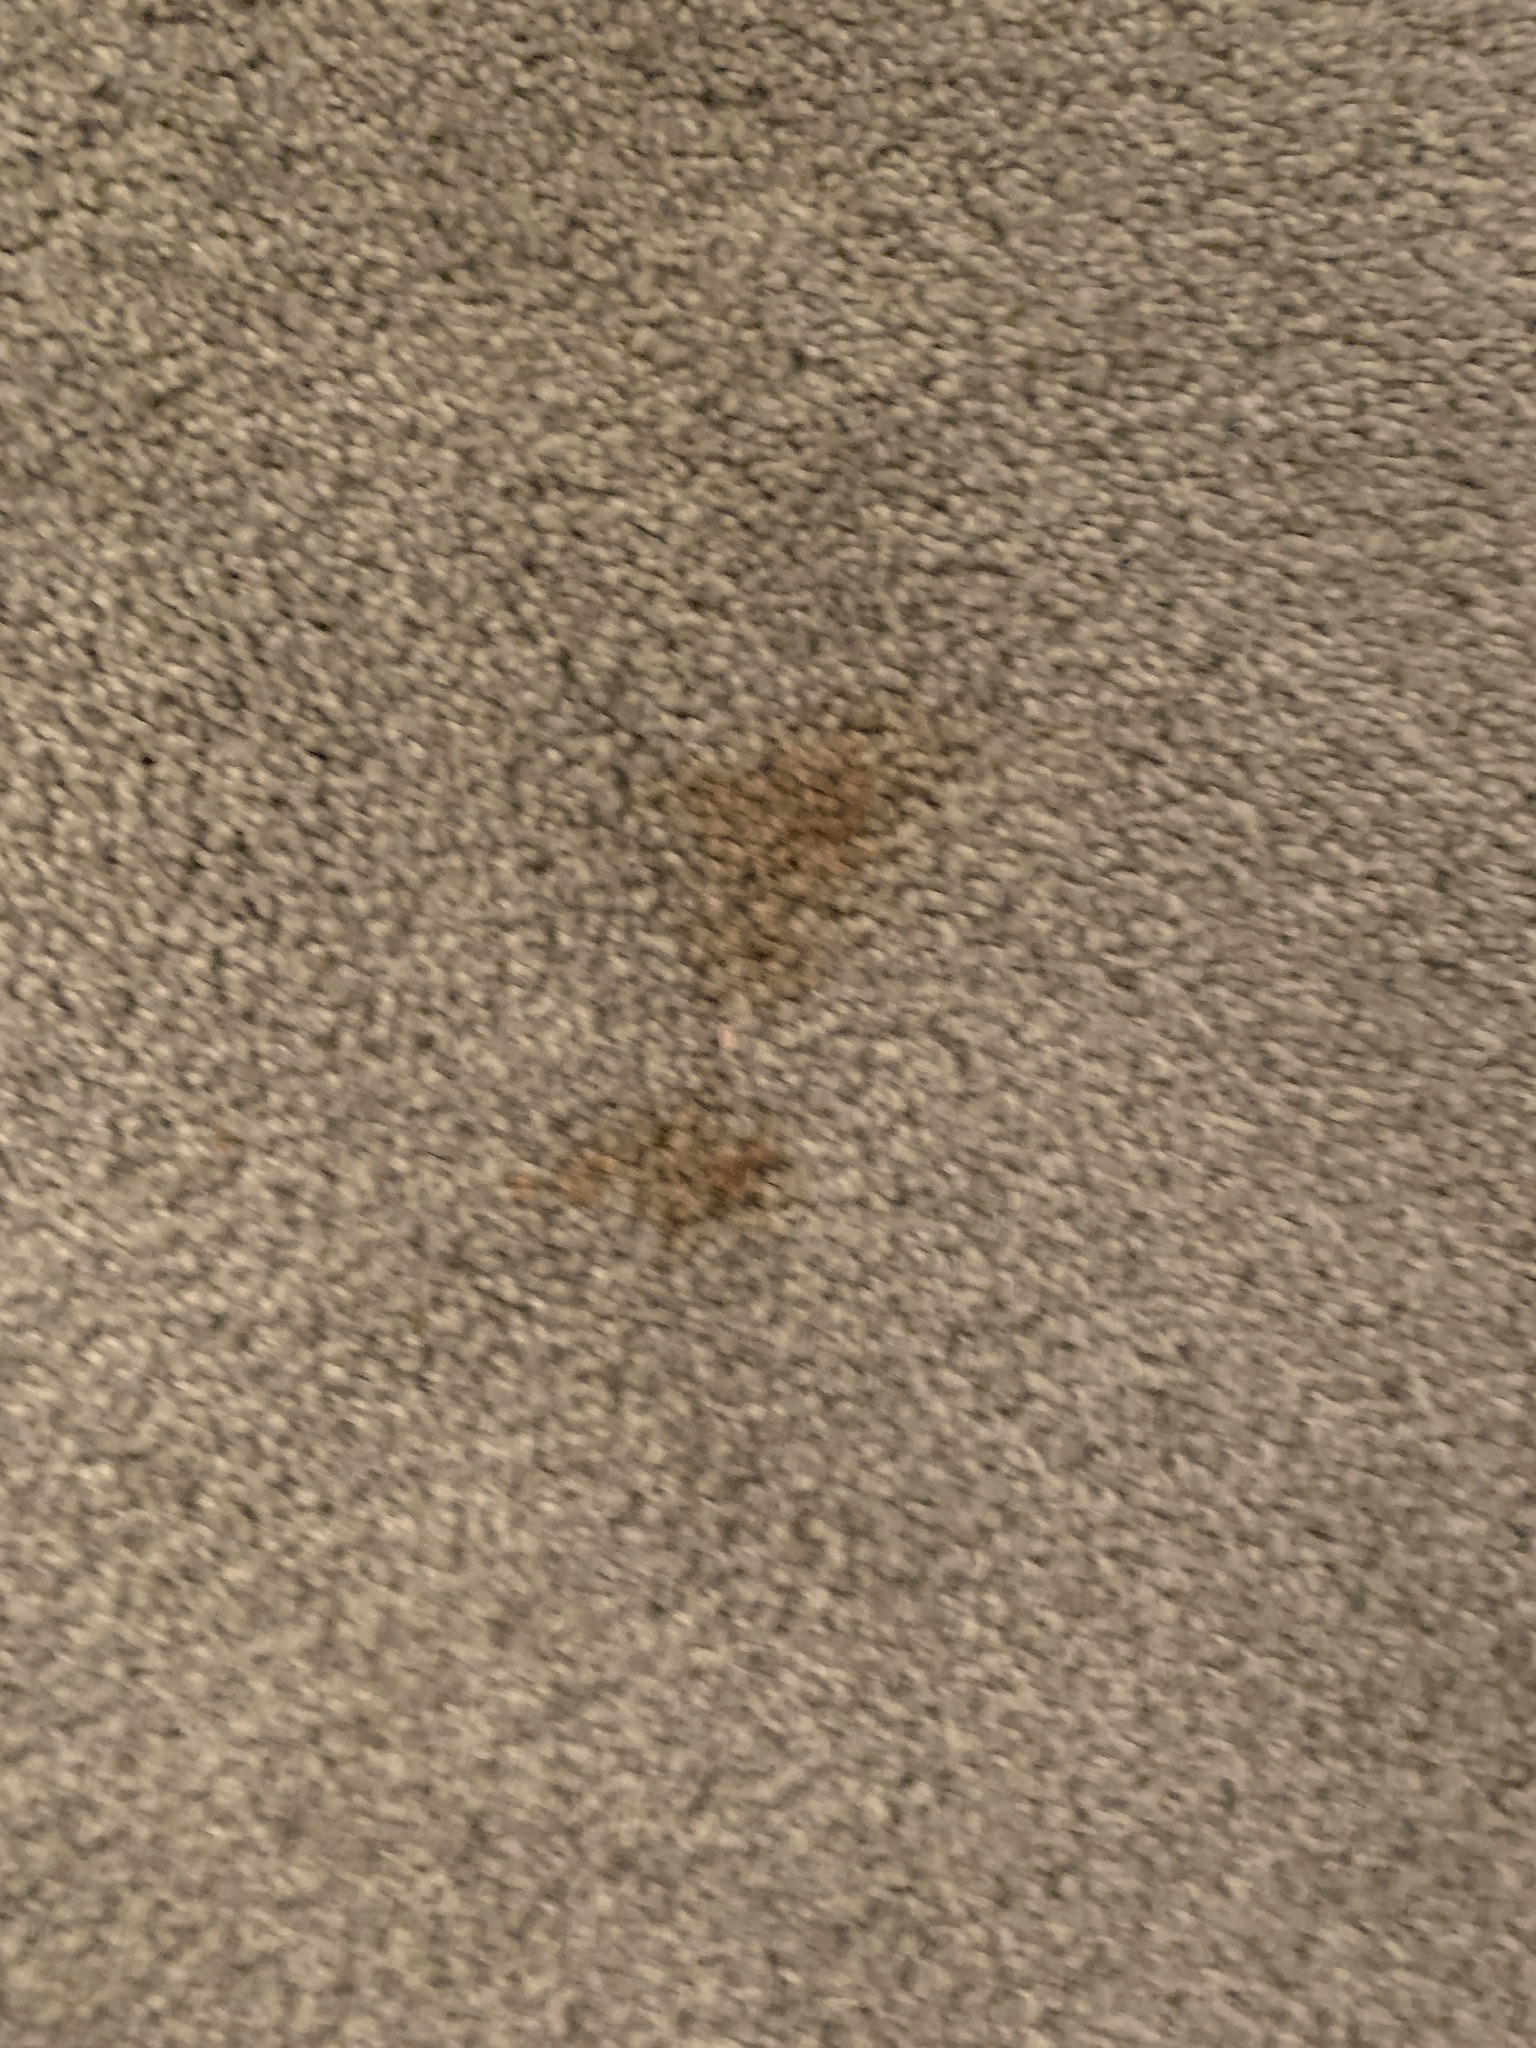 stain to carpet